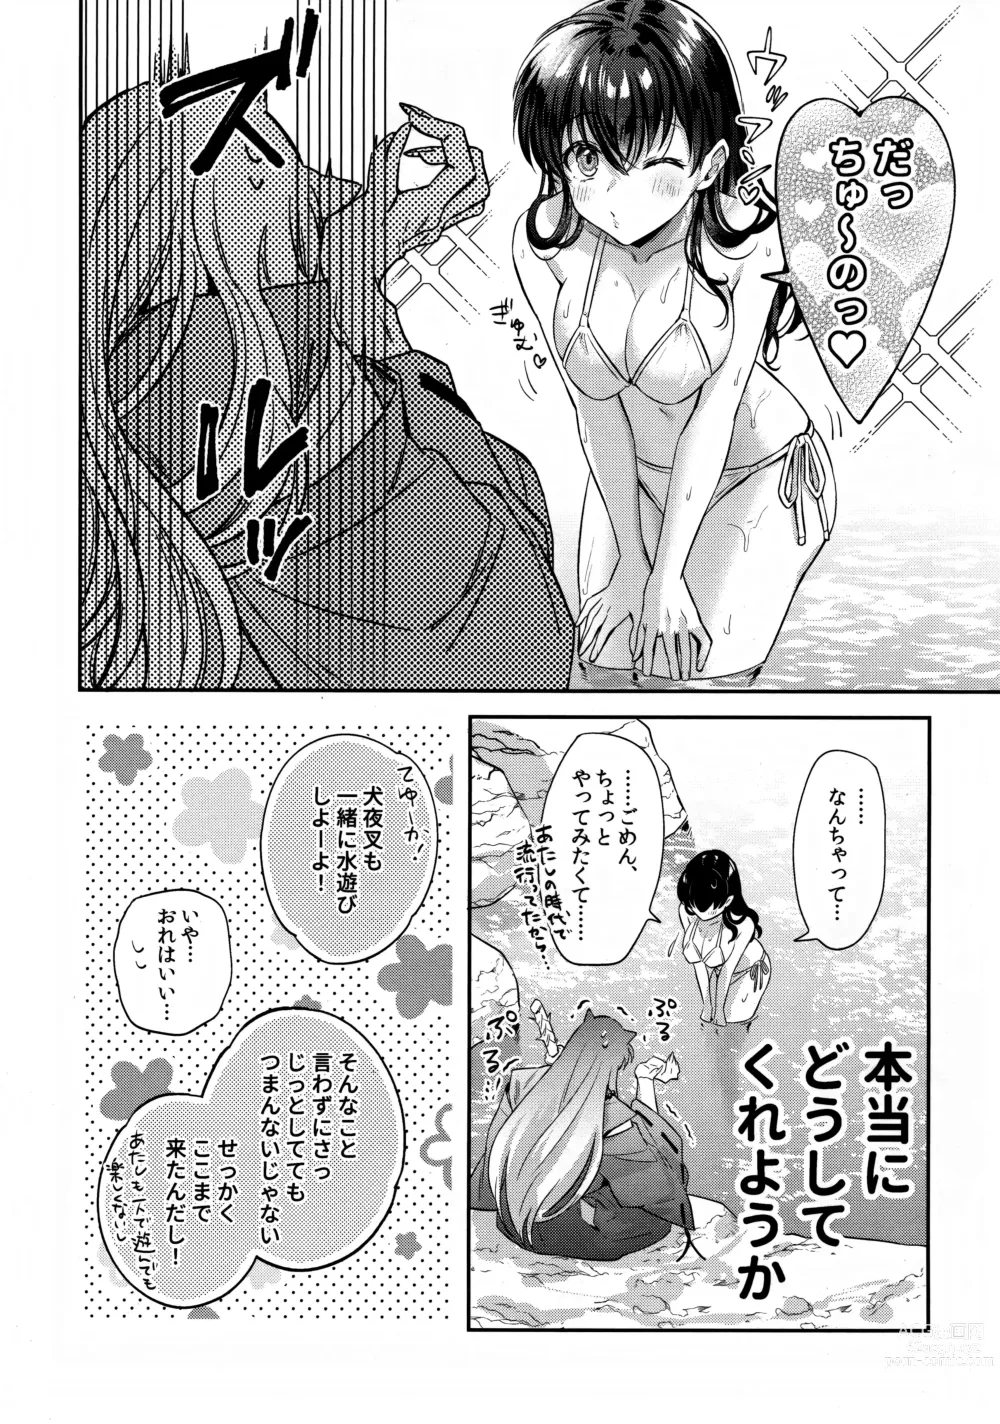 Page 7 of doujinshi LATE-SUMMER GREETHINGS TO YOU!